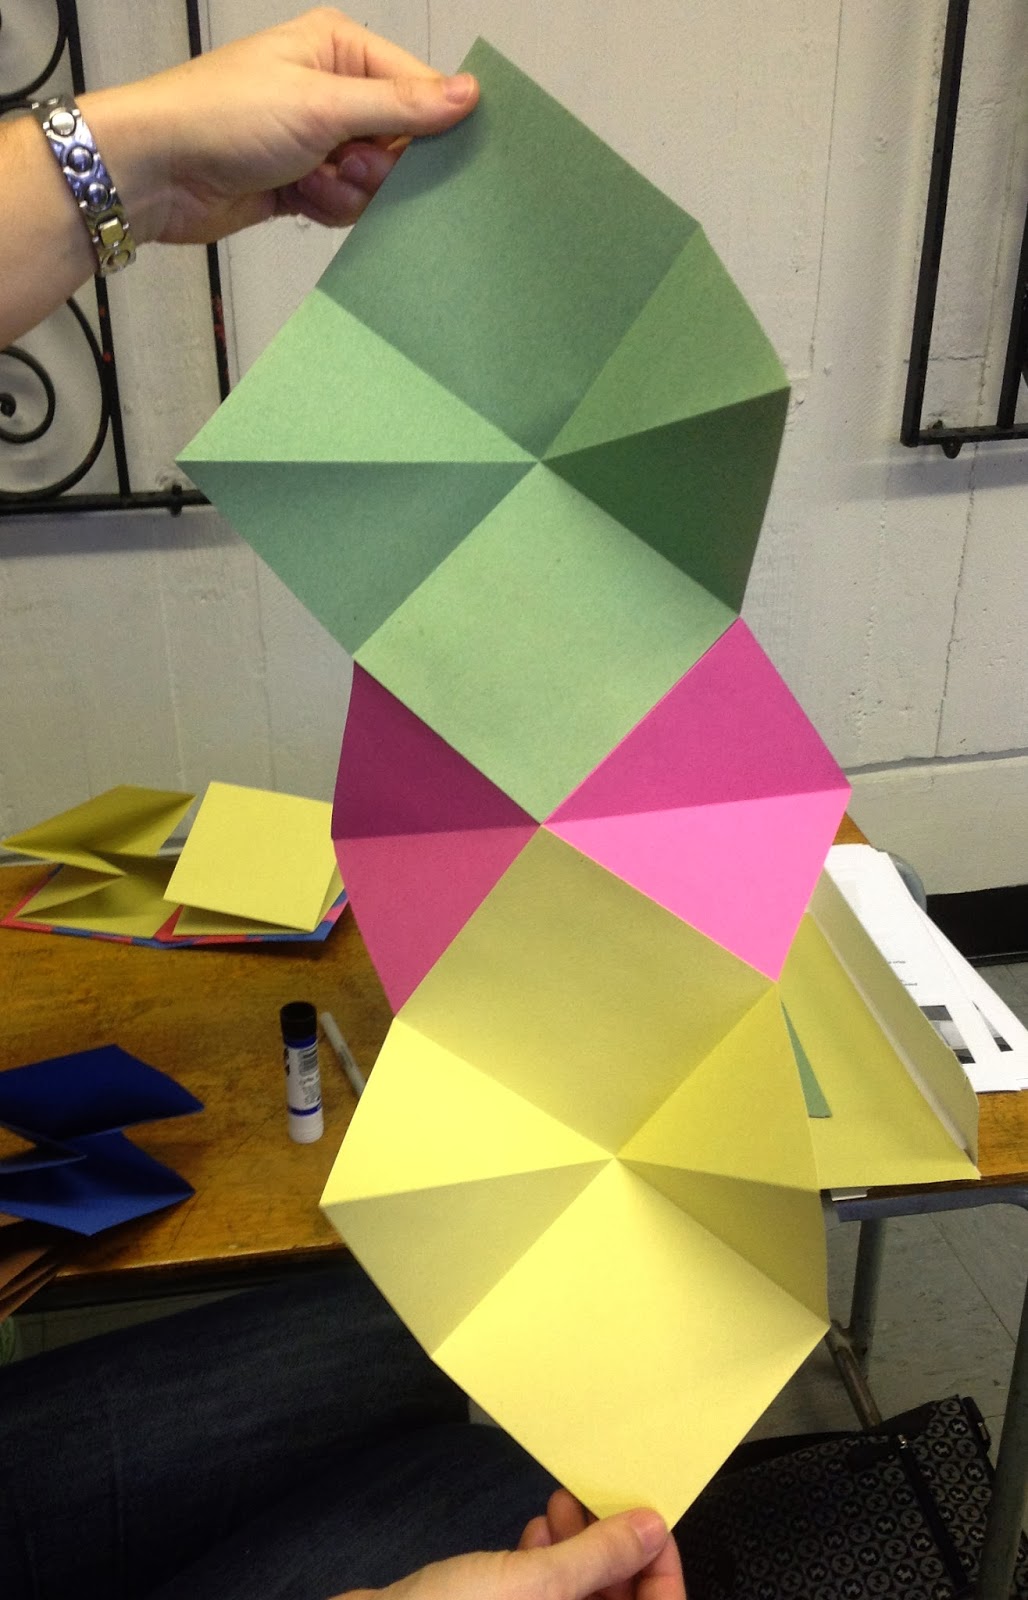 by Charlotte, one of our members, who demonstrated how to make a paper ...